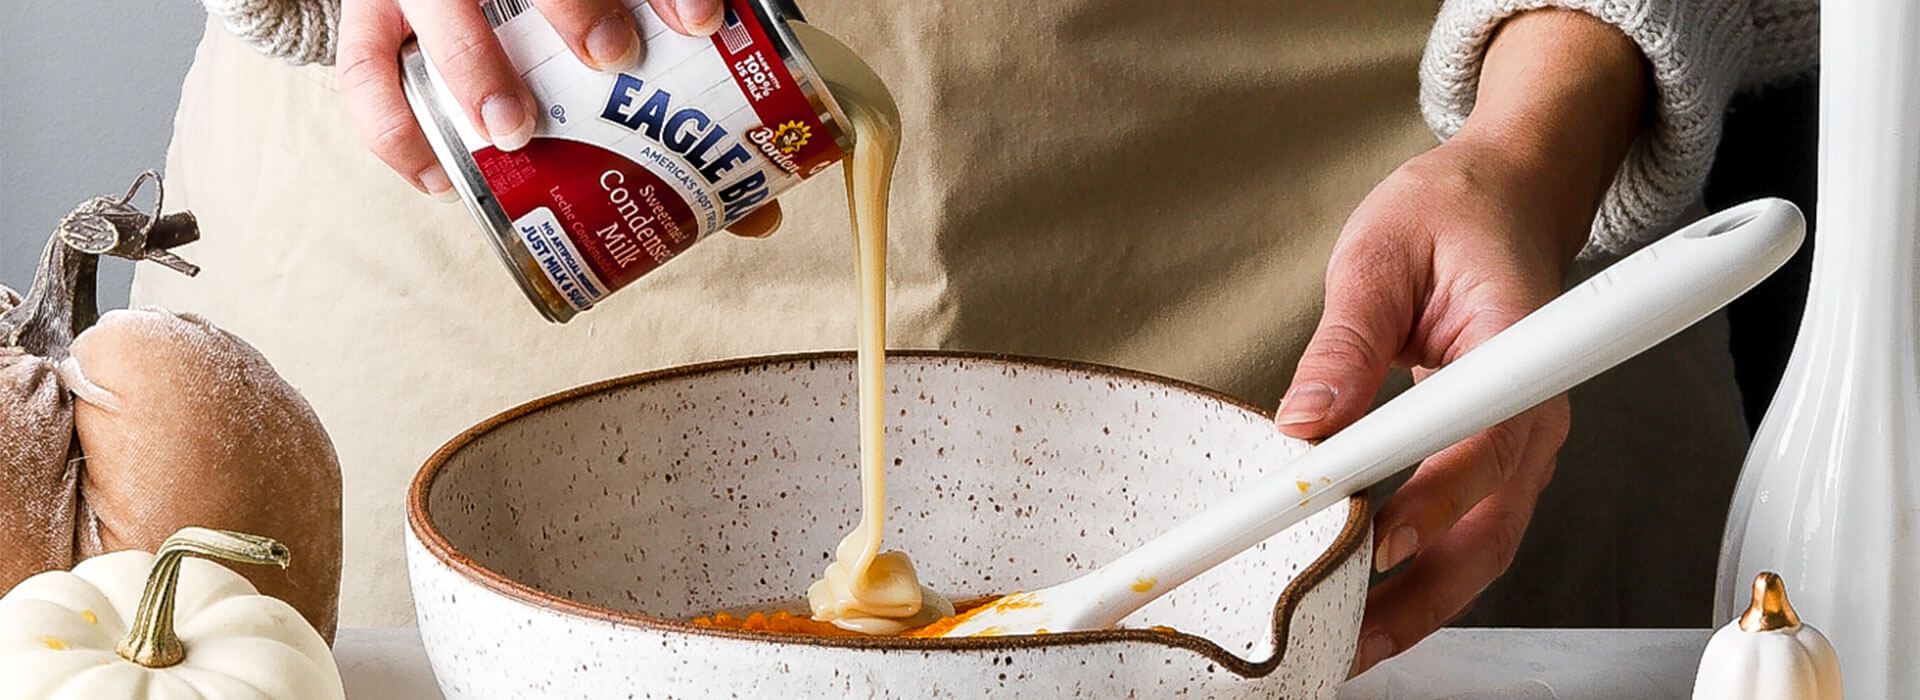 Baking with Eagle Brand Condensed Milk